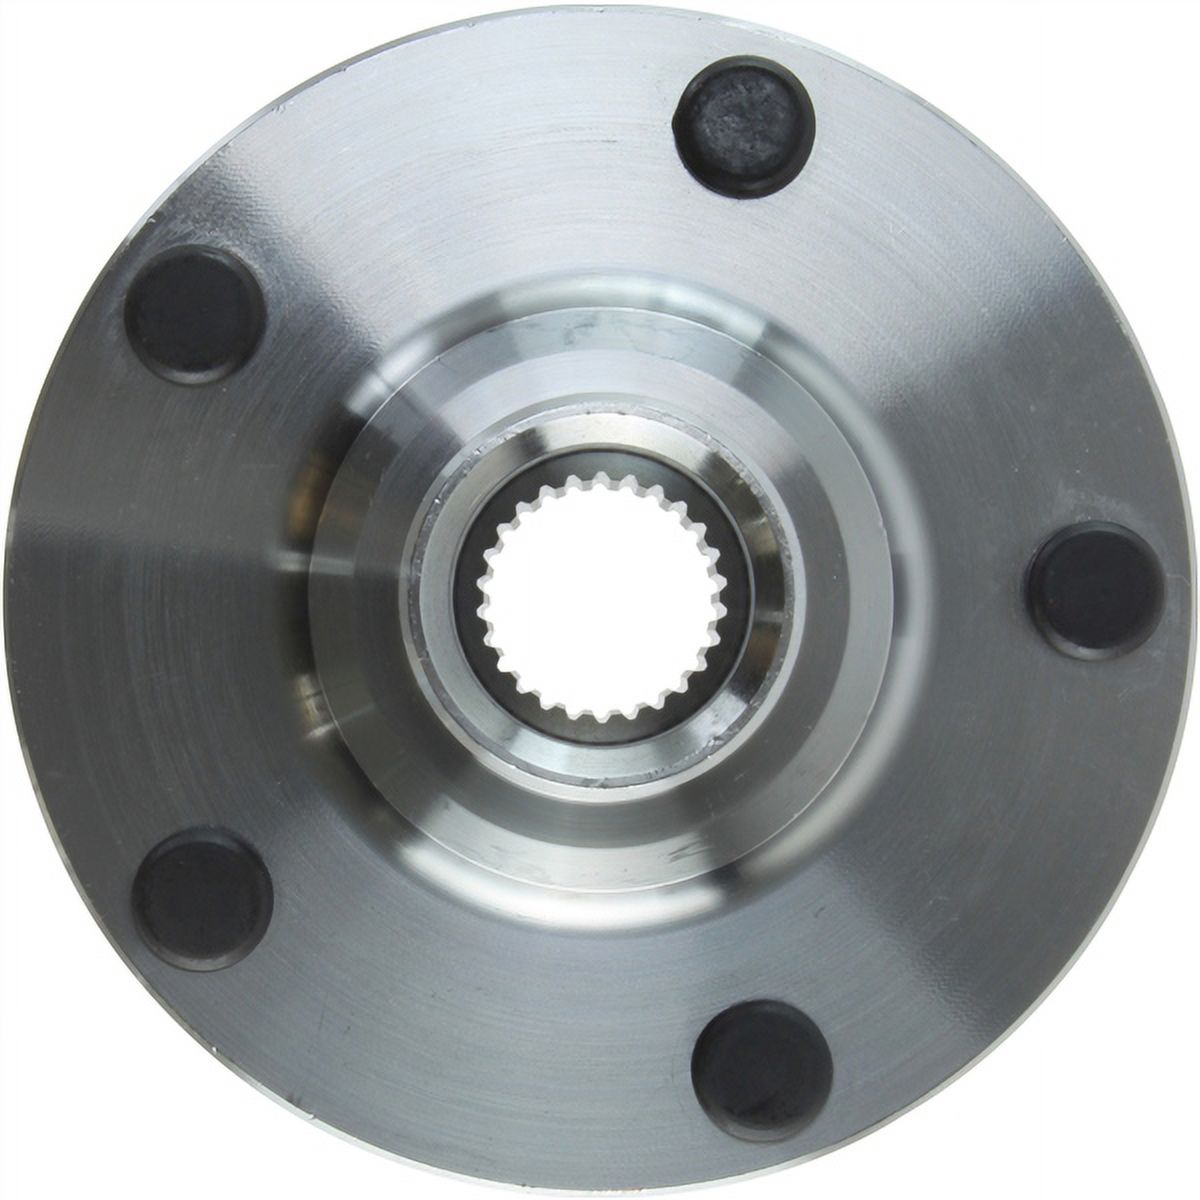 CENTRIC PARTS - HUB ASSEMBLY Fits select: 1992-2003 TOYOTA CAMRY, 1999-2001 LEXUS RX - image 2 of 5